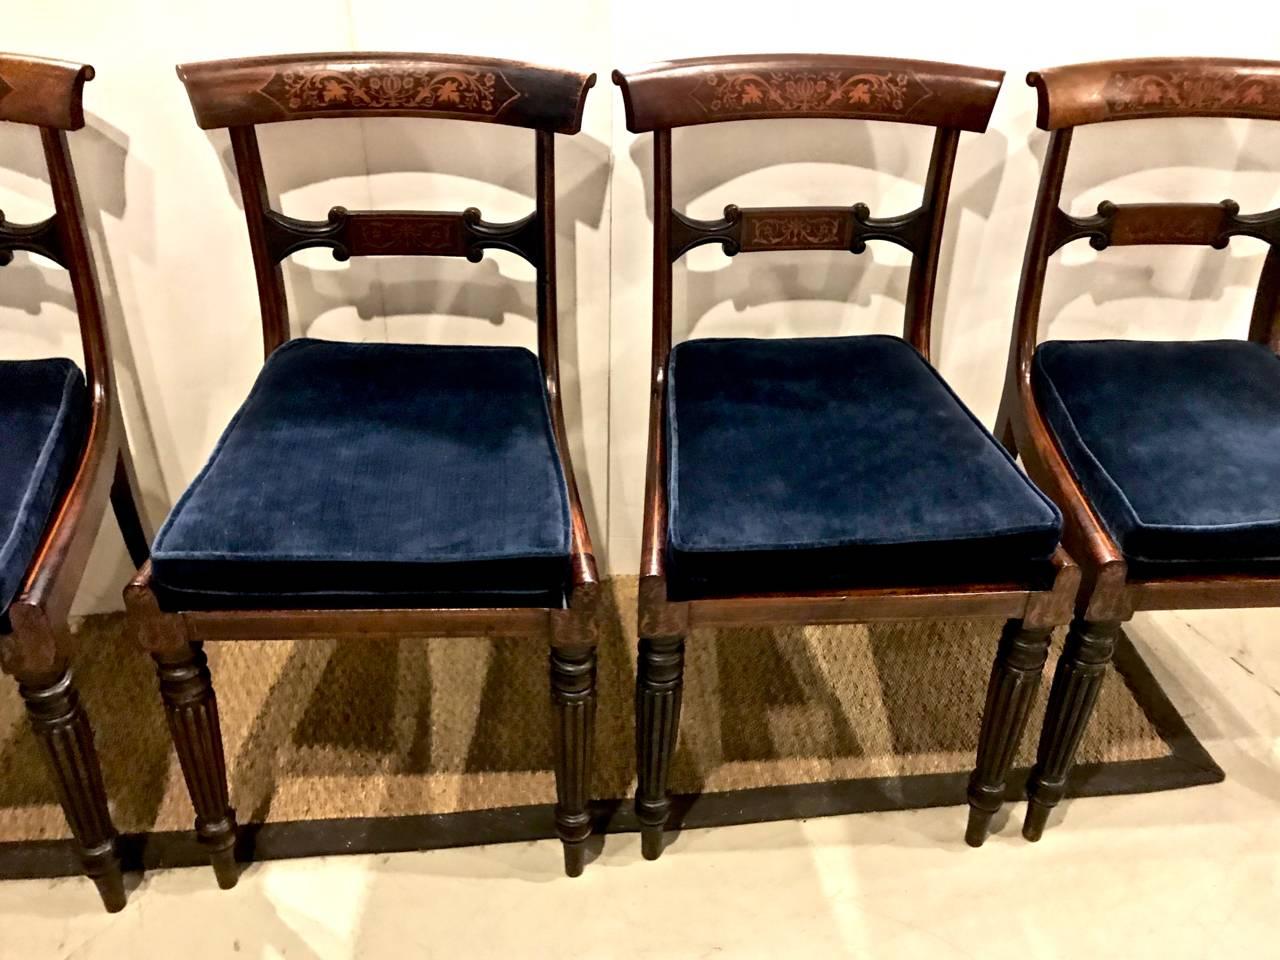 Regency Inlaid Rosewood Dining Chairs c. 1810-20, Set of Four 1